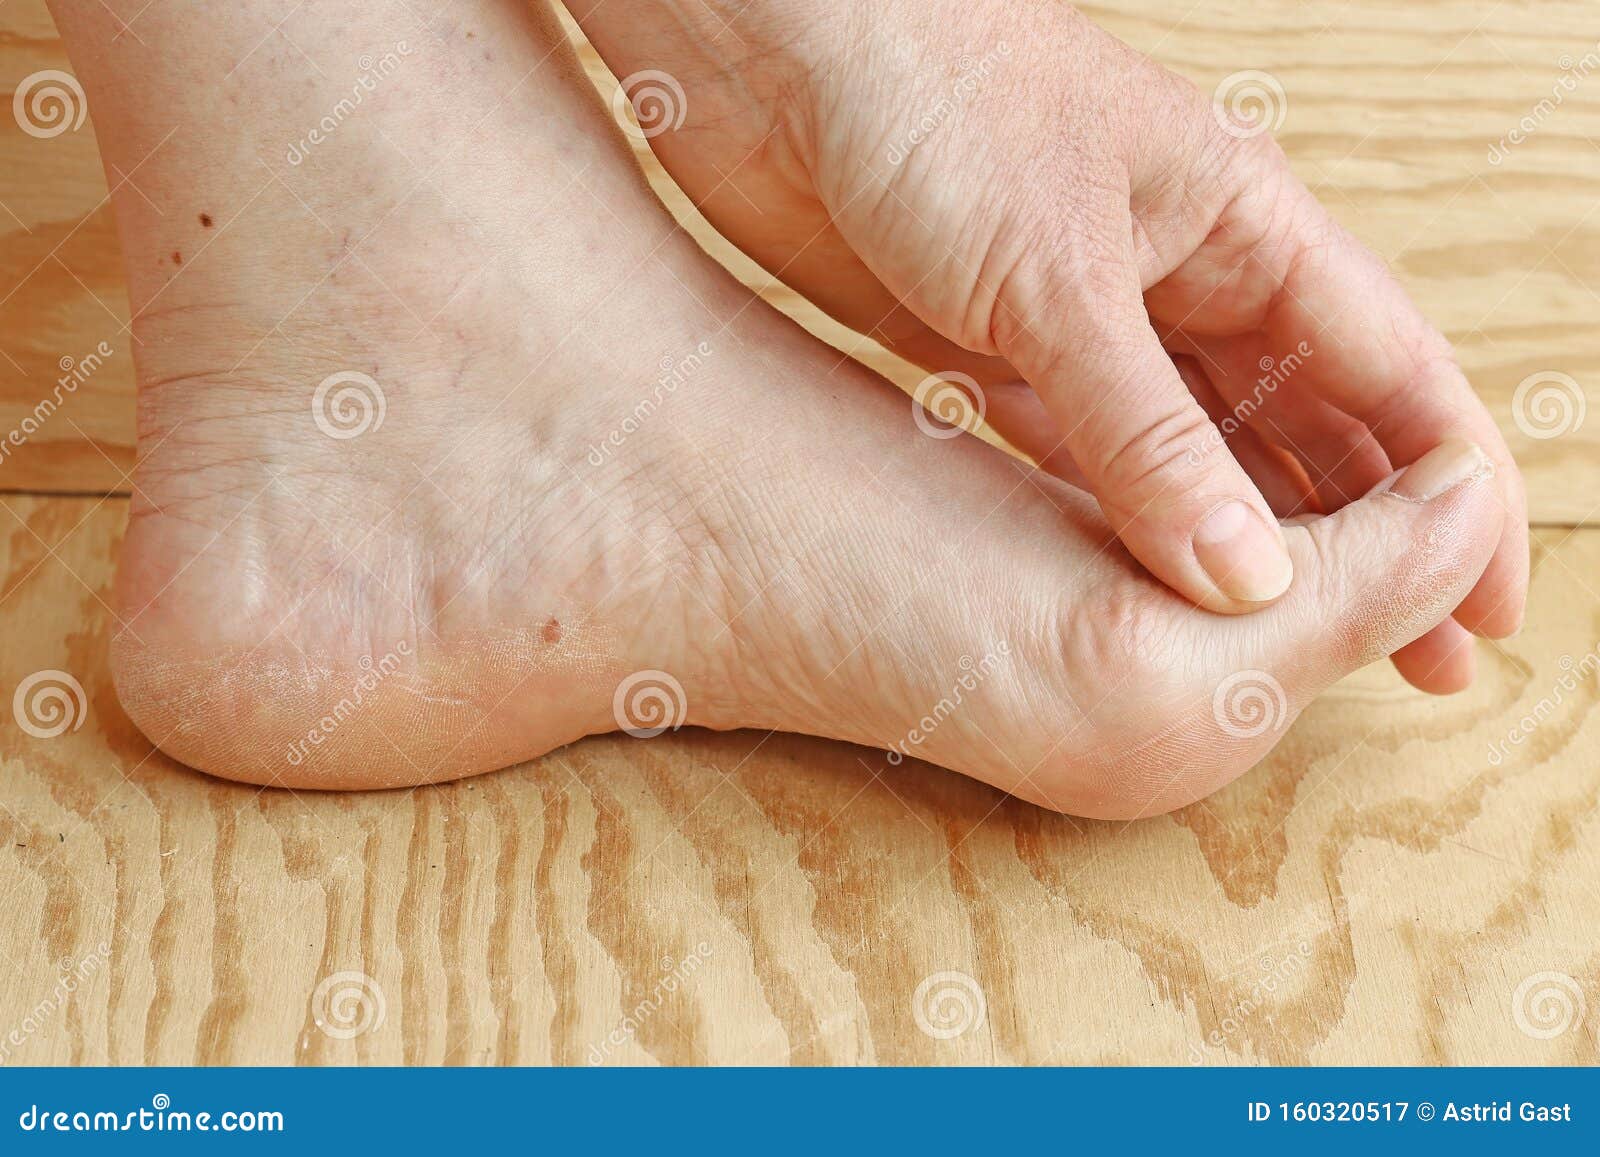 dry skin and cornea on toes and heel of a woman